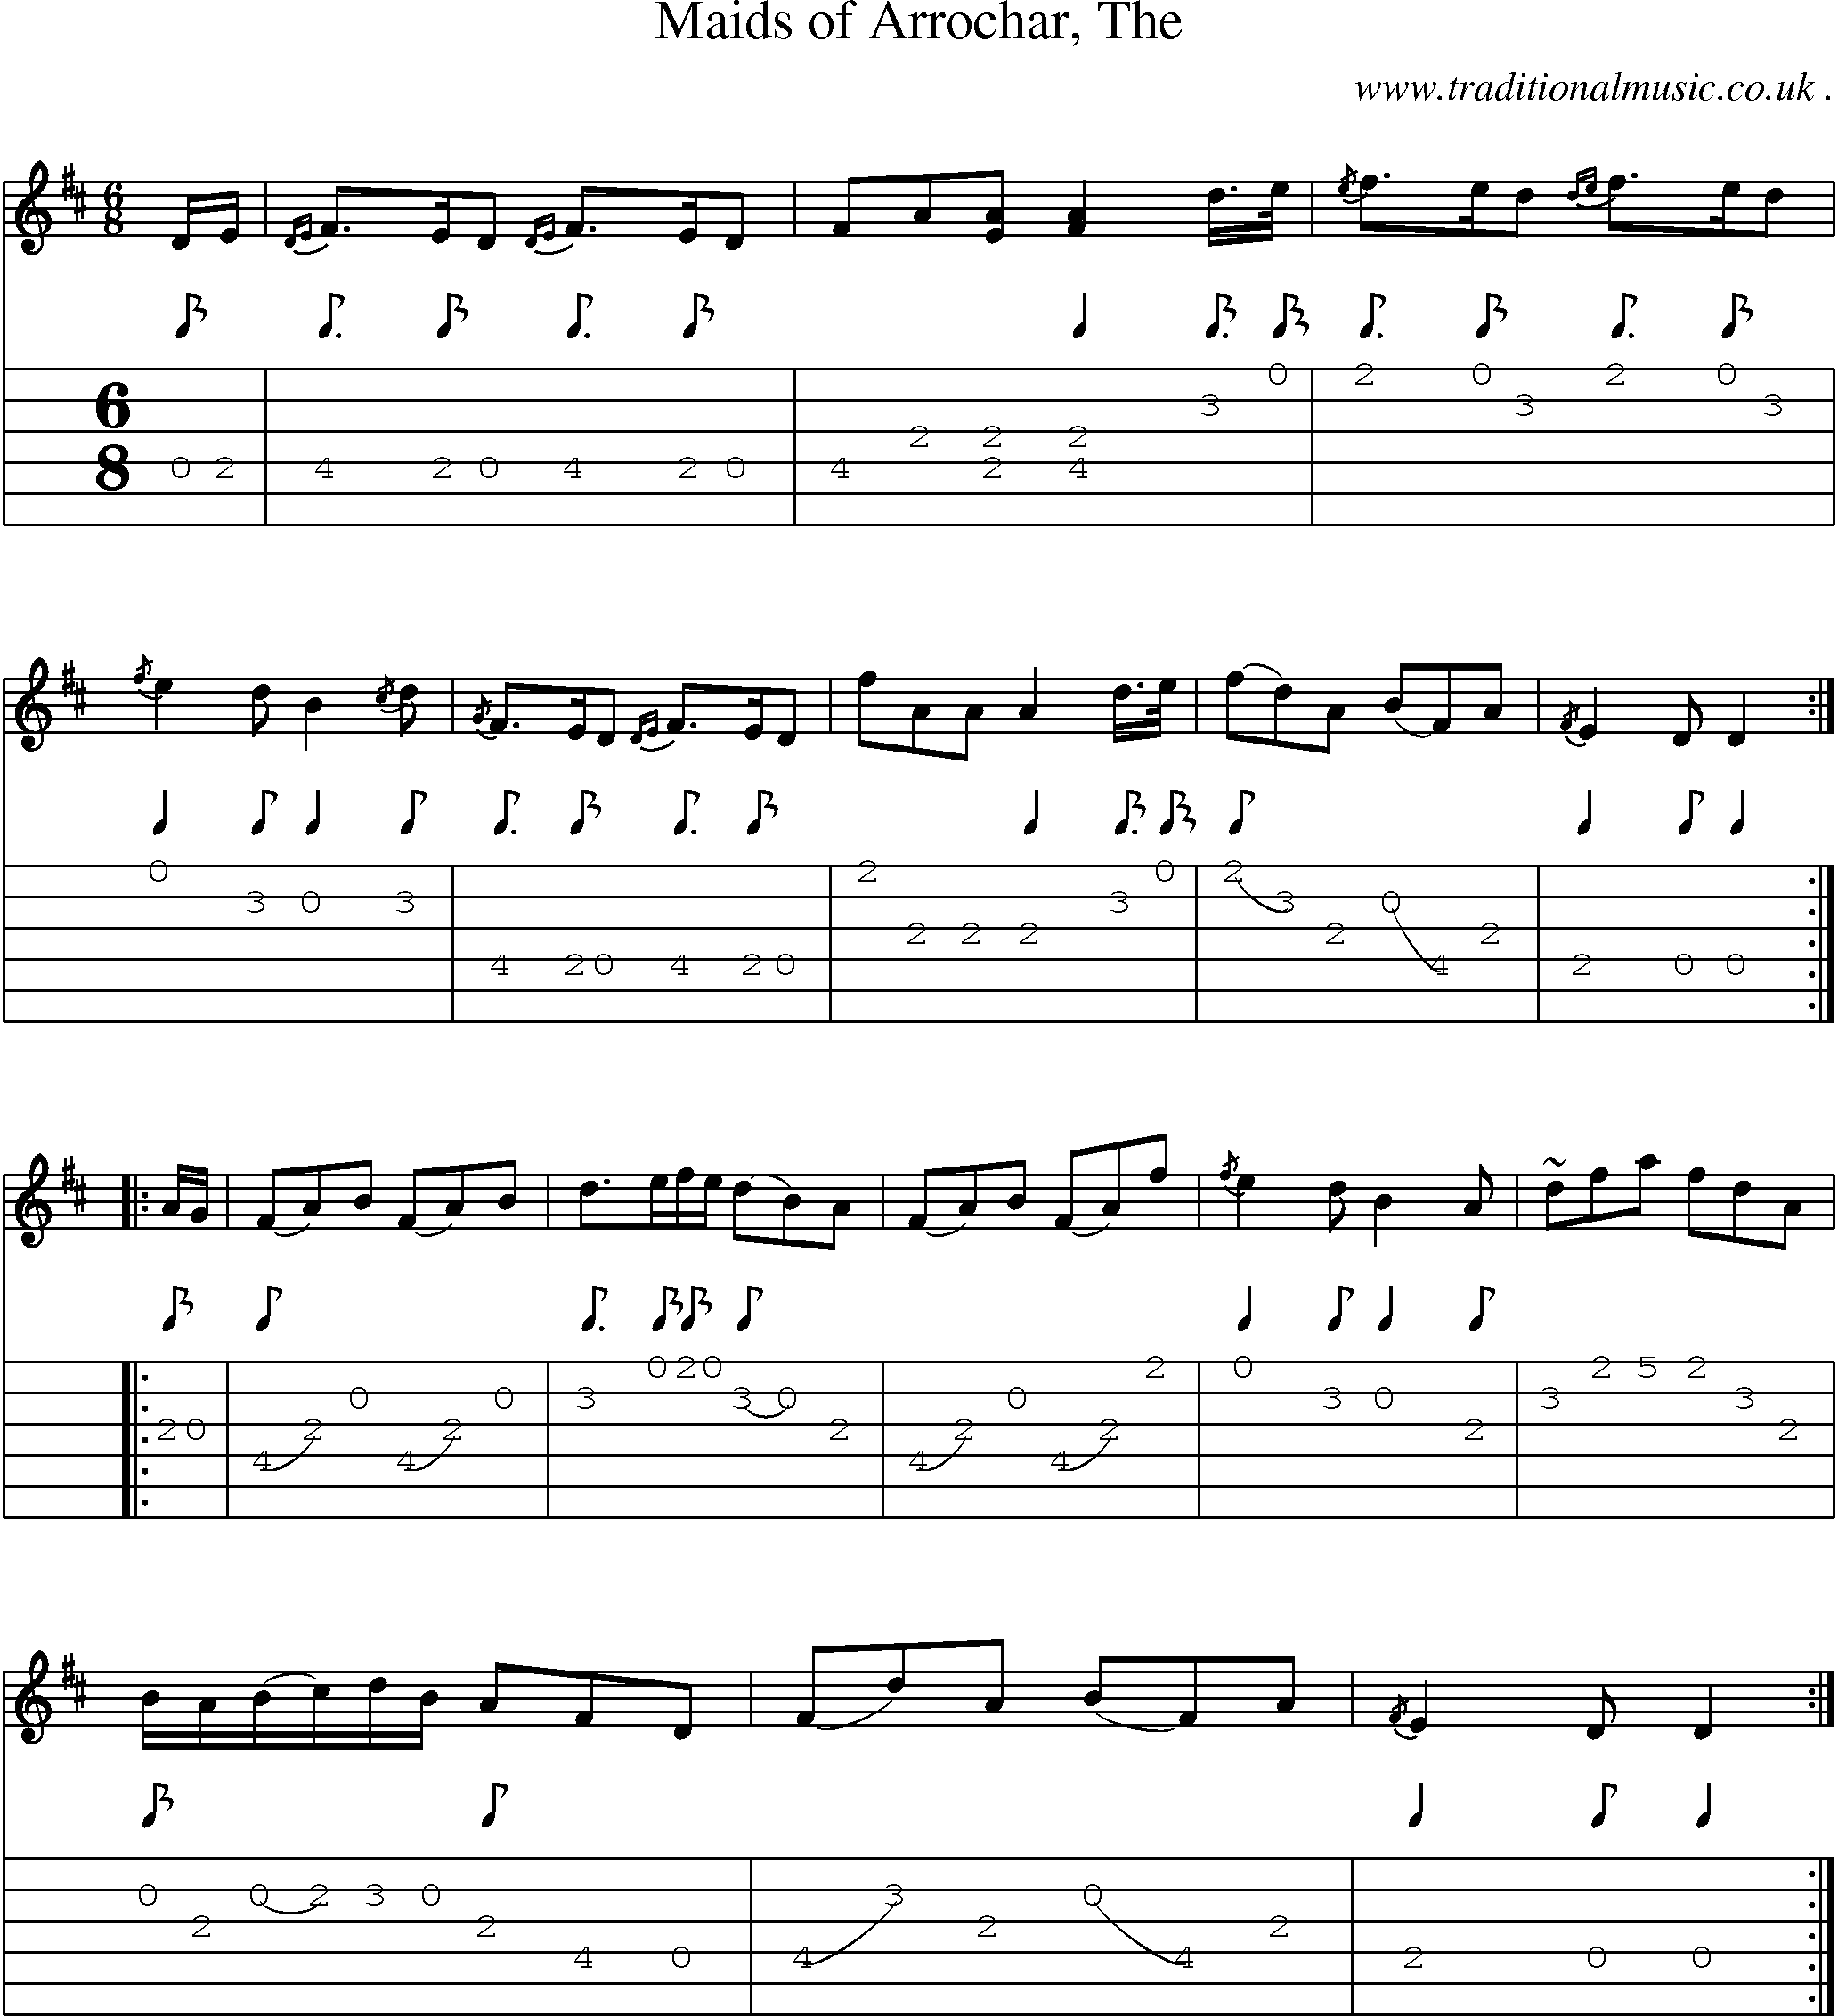 Sheet-music  score, Chords and Guitar Tabs for Maids Of Arrochar The